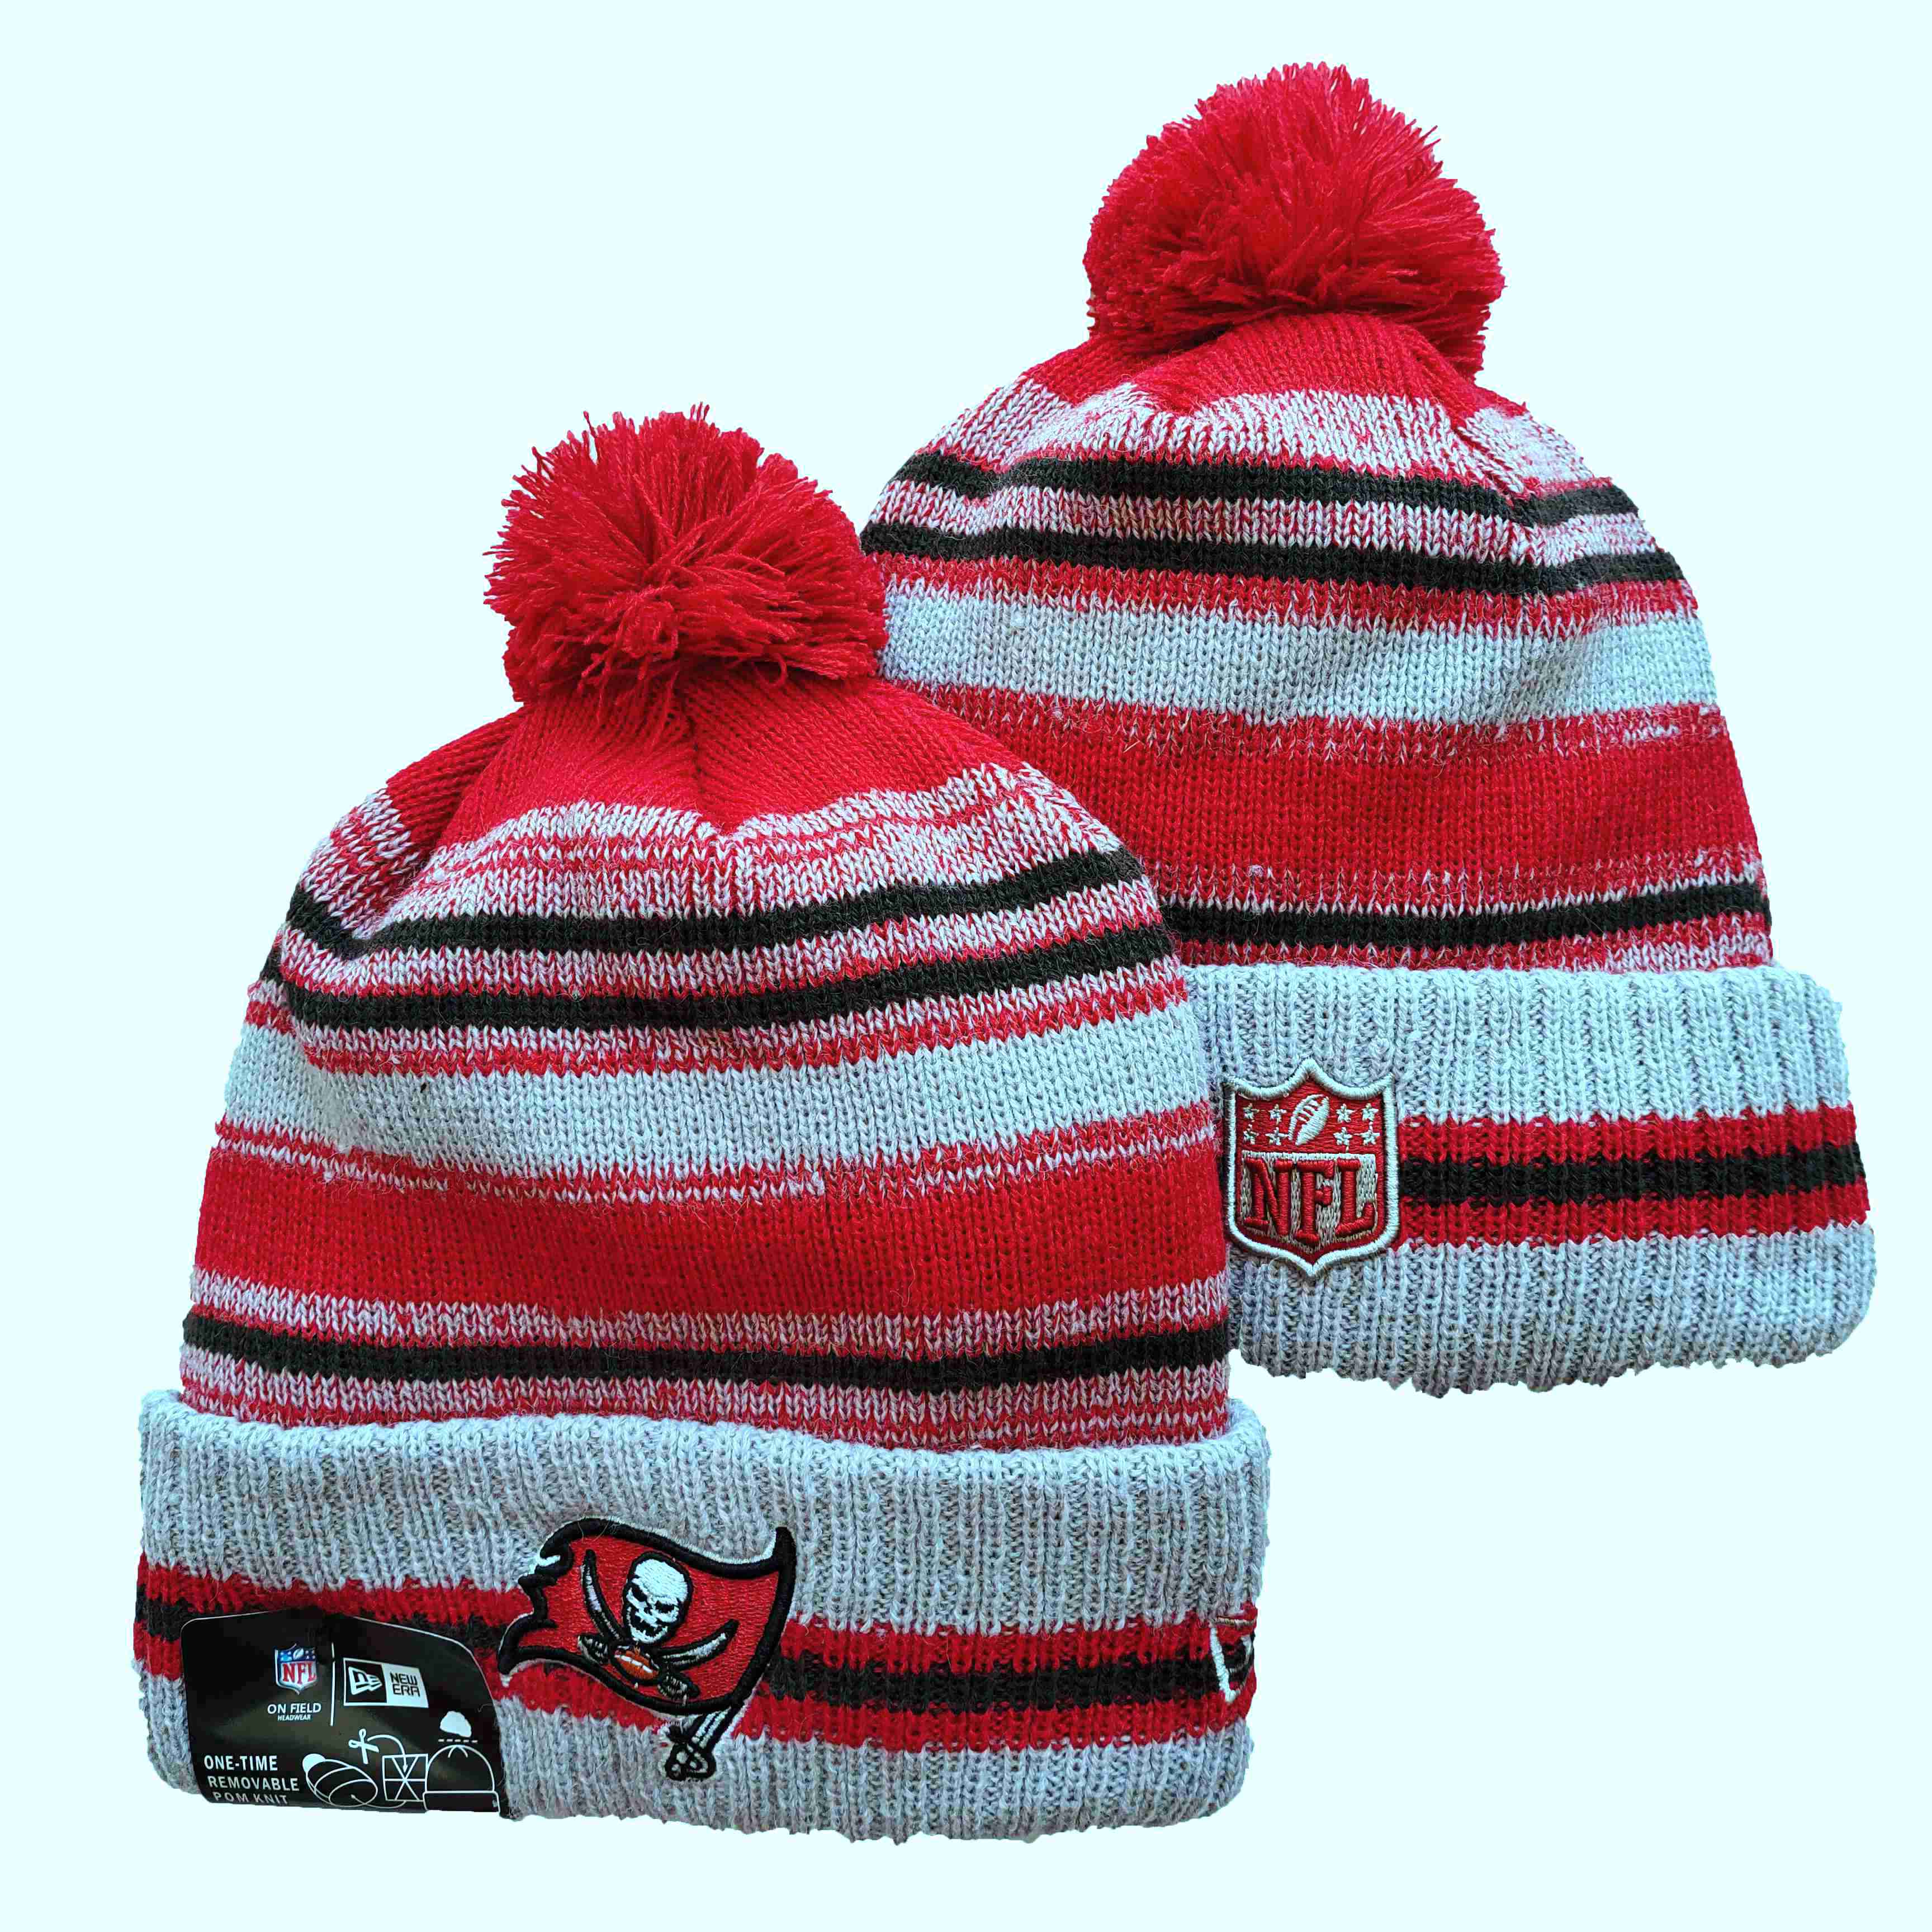 Tampa Bay Buccaneers 2021 Knit Hats 0218